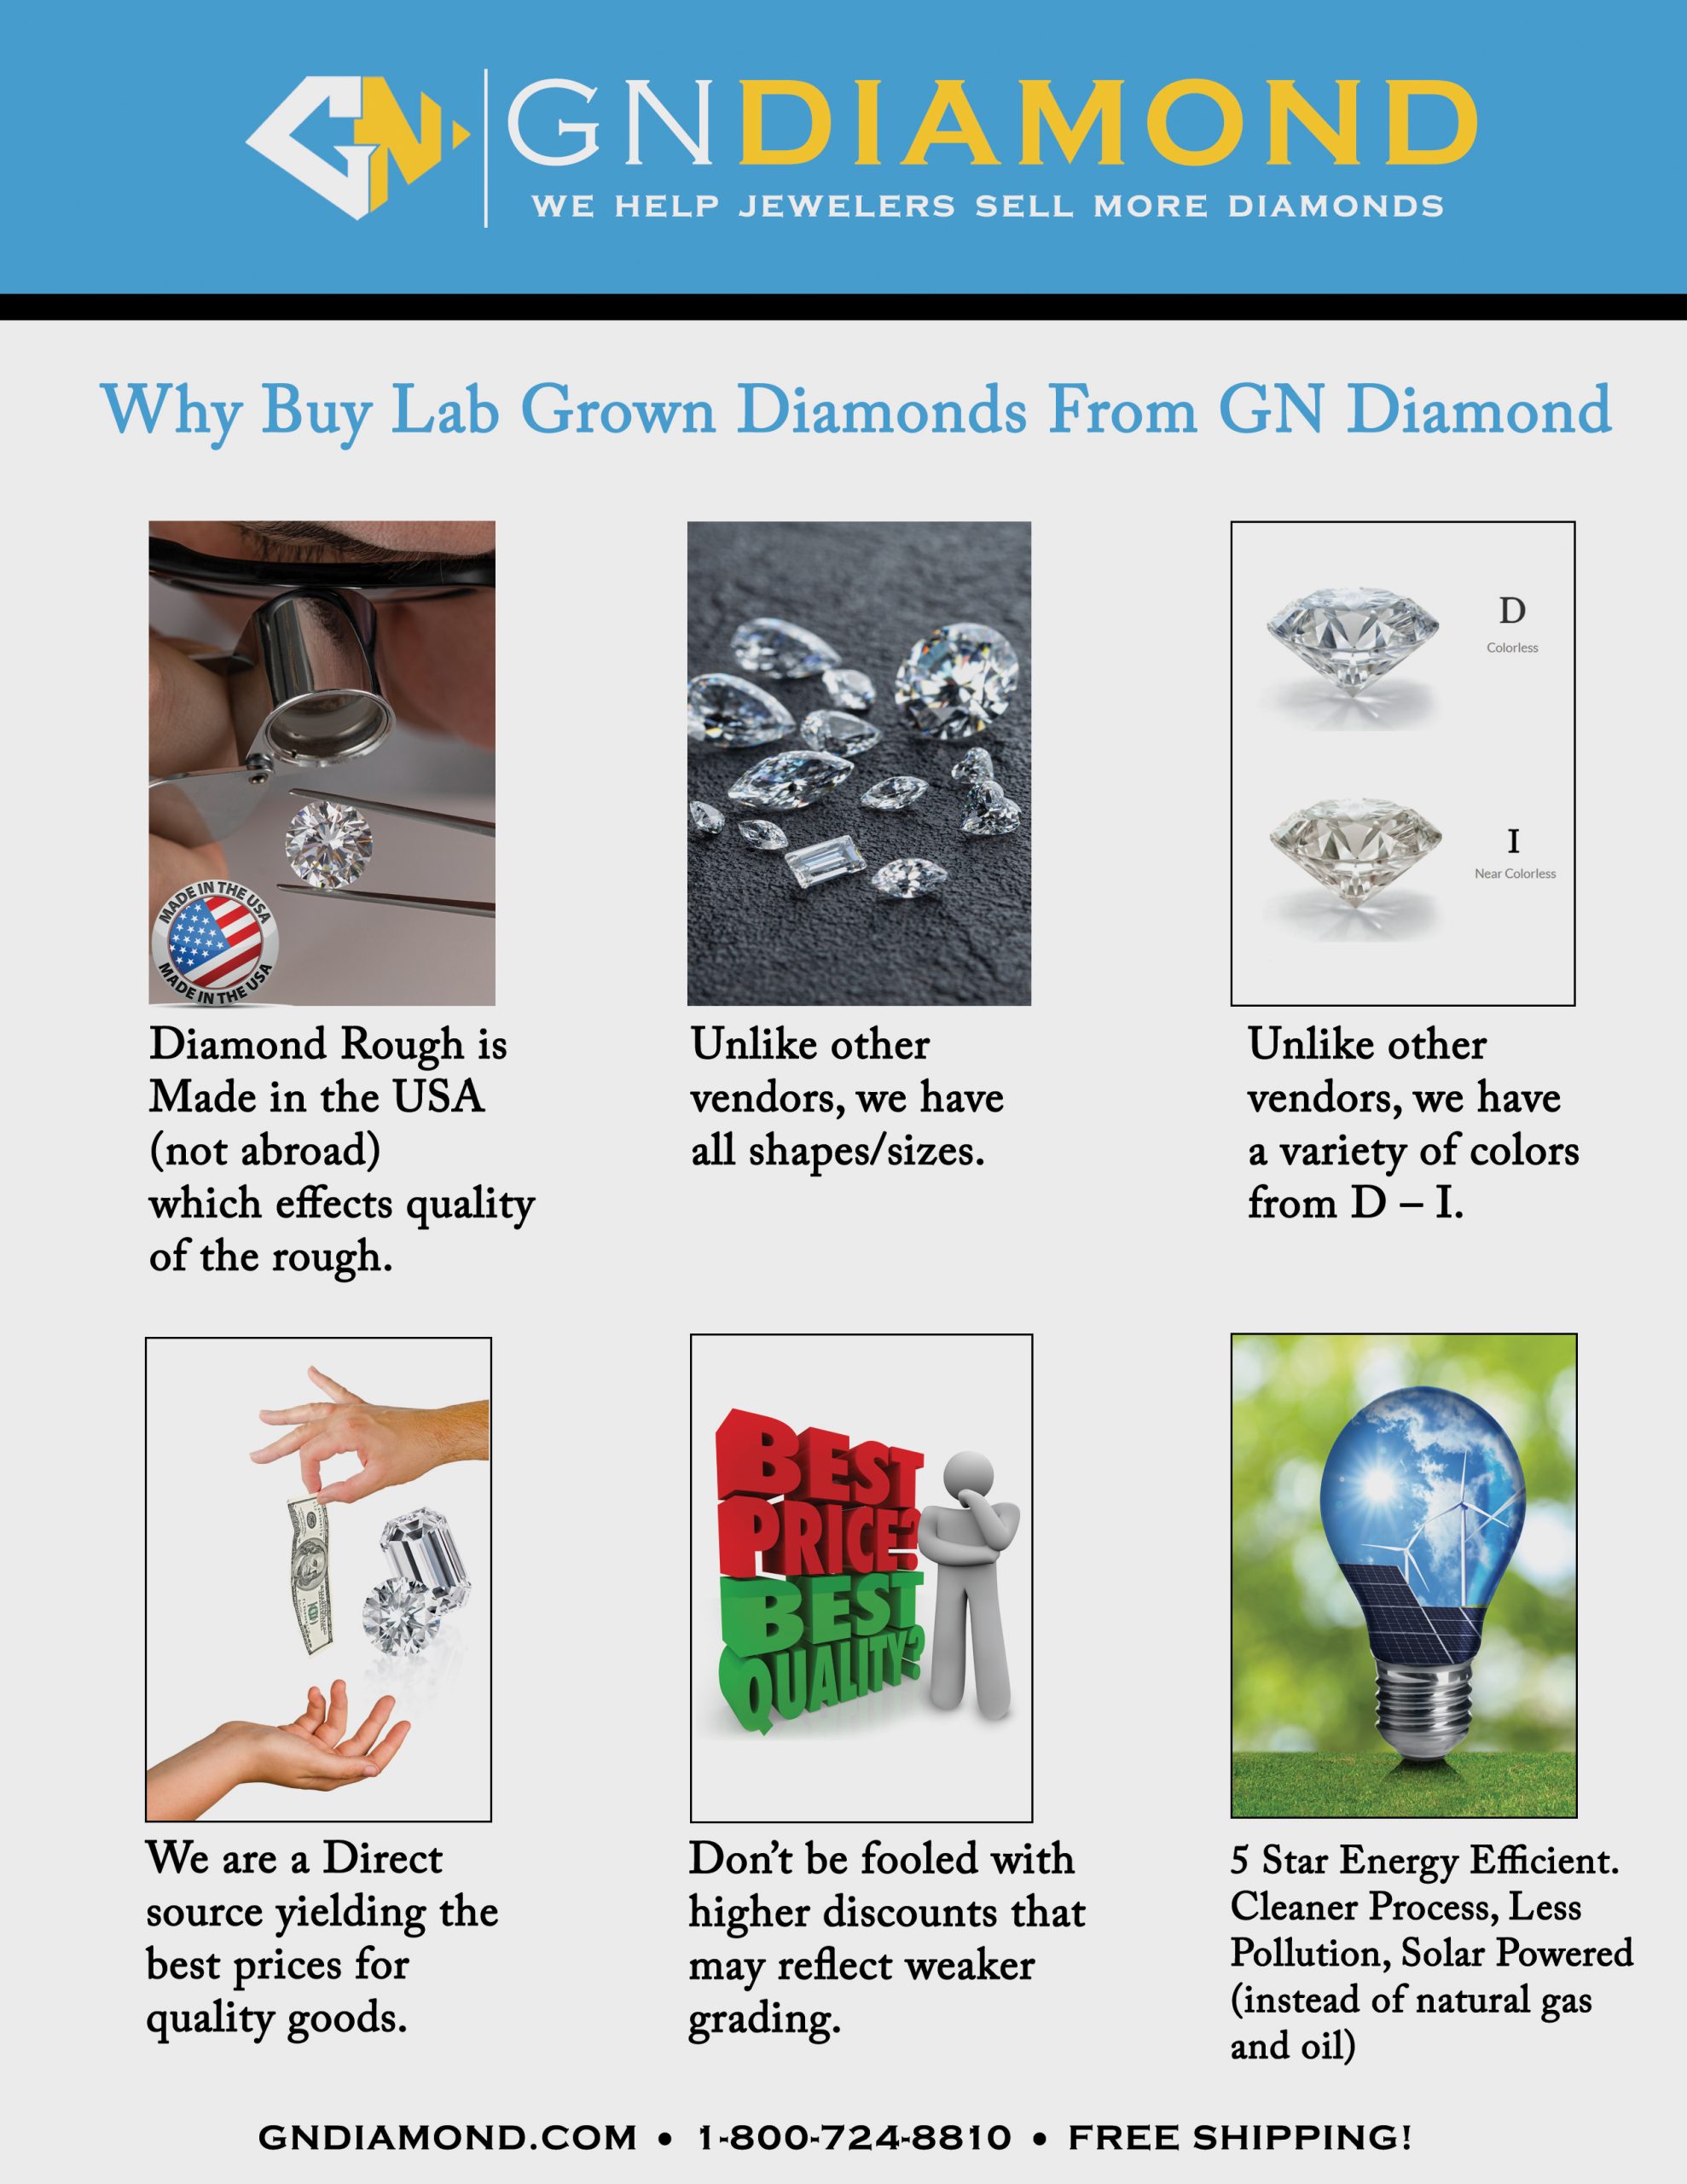 Many Retailers are Reporting Increased Sales with Strong Emphasis on Lab Grown Diamonds